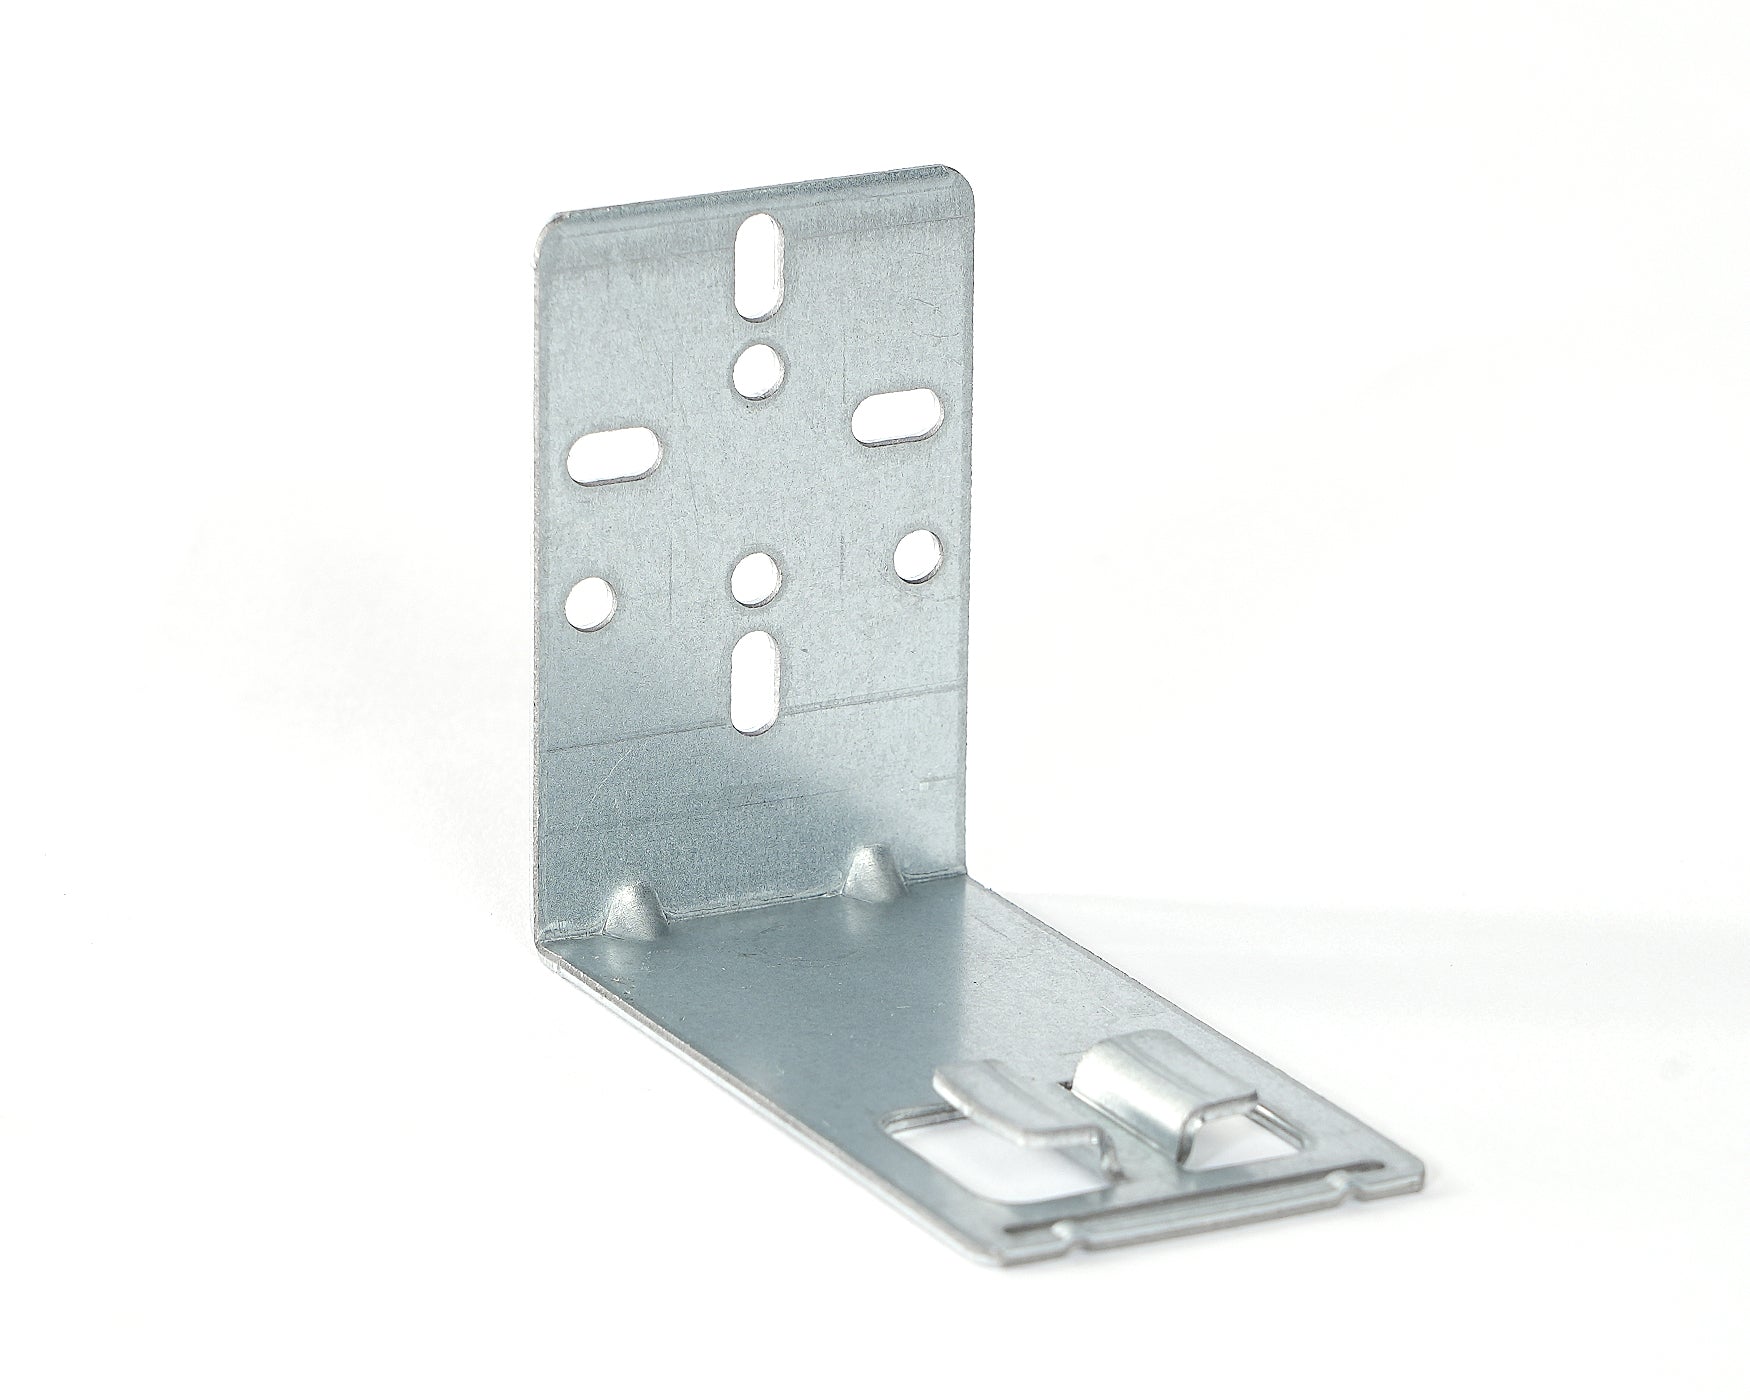 FGV Rear Mounting Bracket for Use with EXCEL Undermount Drawer Slides, Sold in Pairs